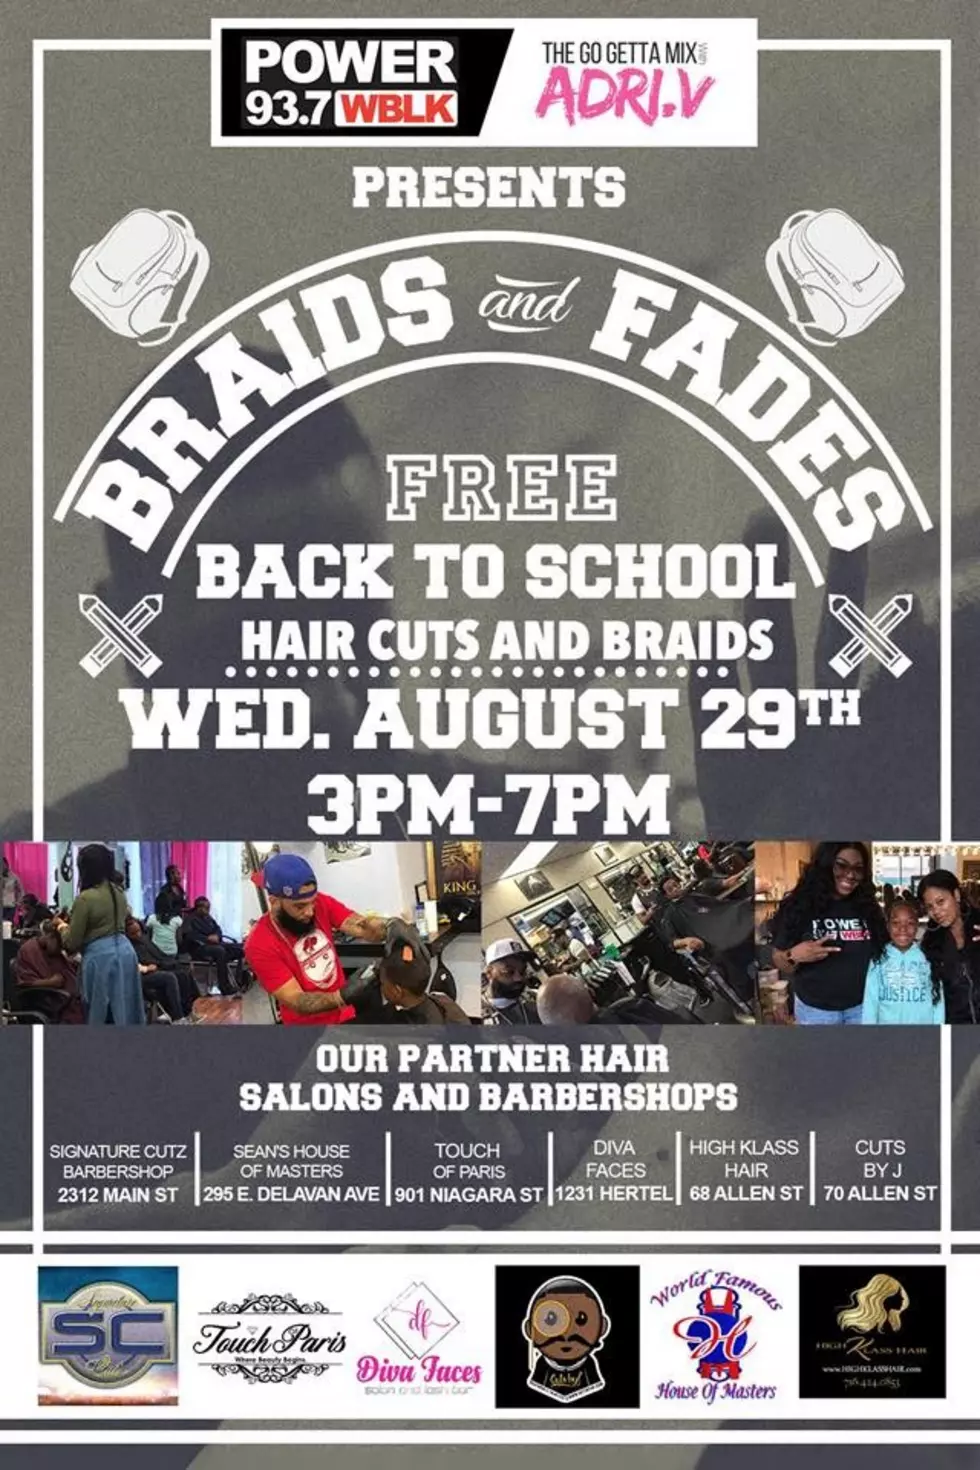 The Go Getta Mix With ADRI.V Presents Braids &#038; Fades Back To School Free Hair Cuts and Braids